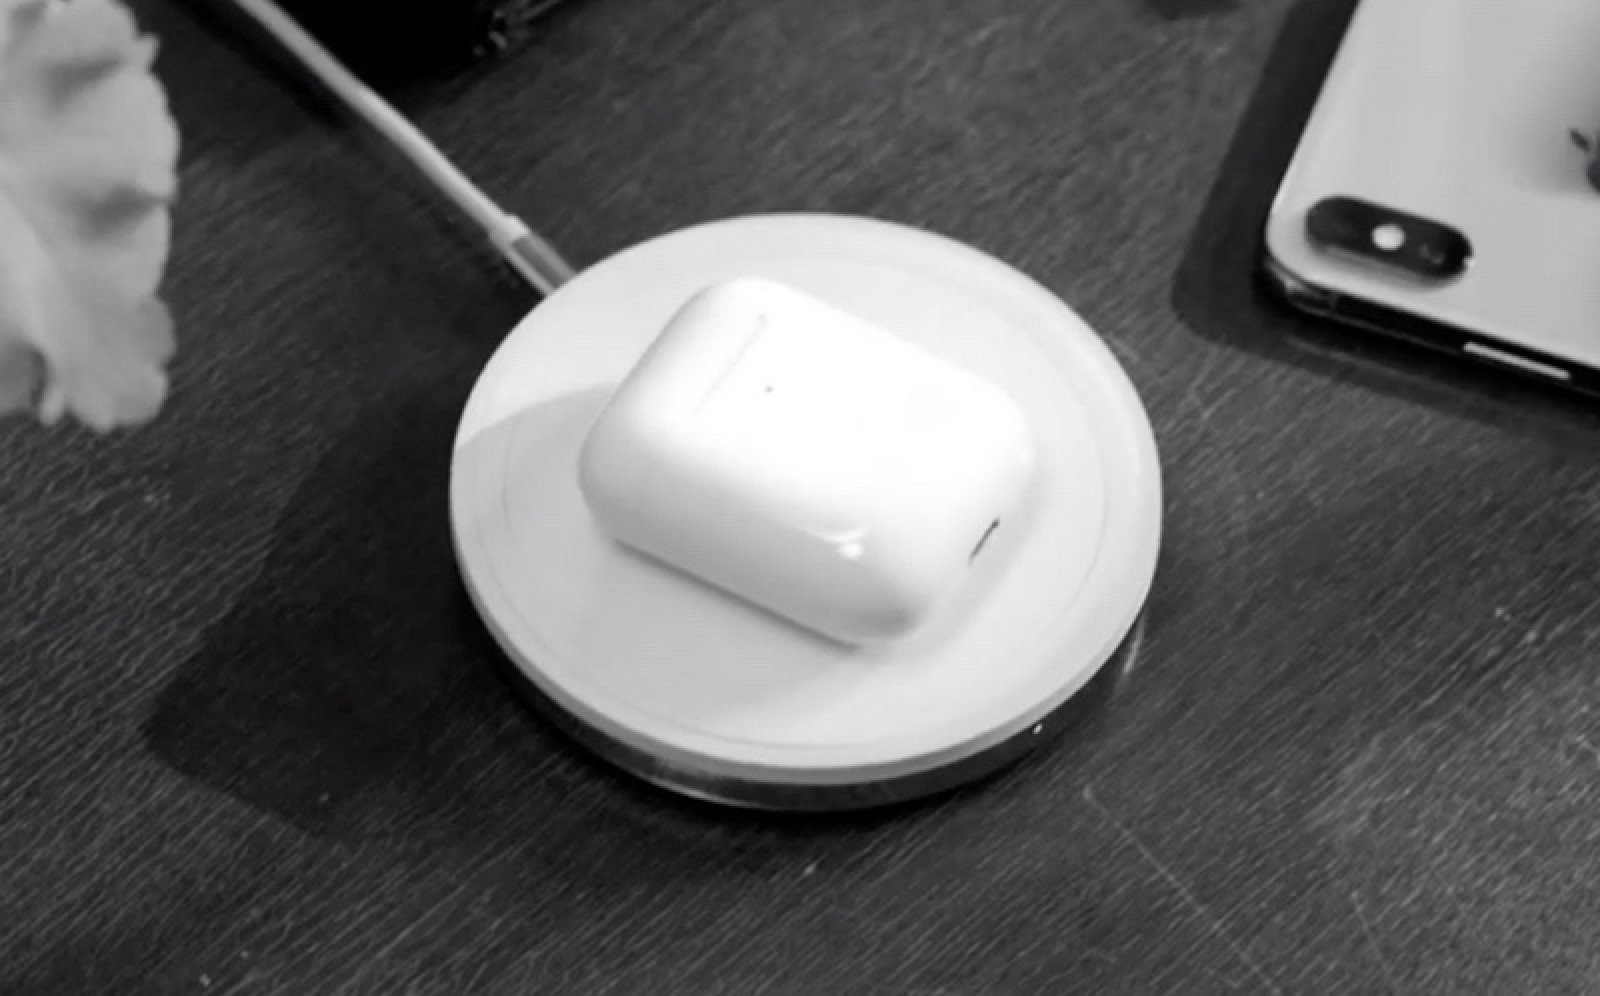 Apple Shares New AirPods Ad Highlighting Wireless Charging